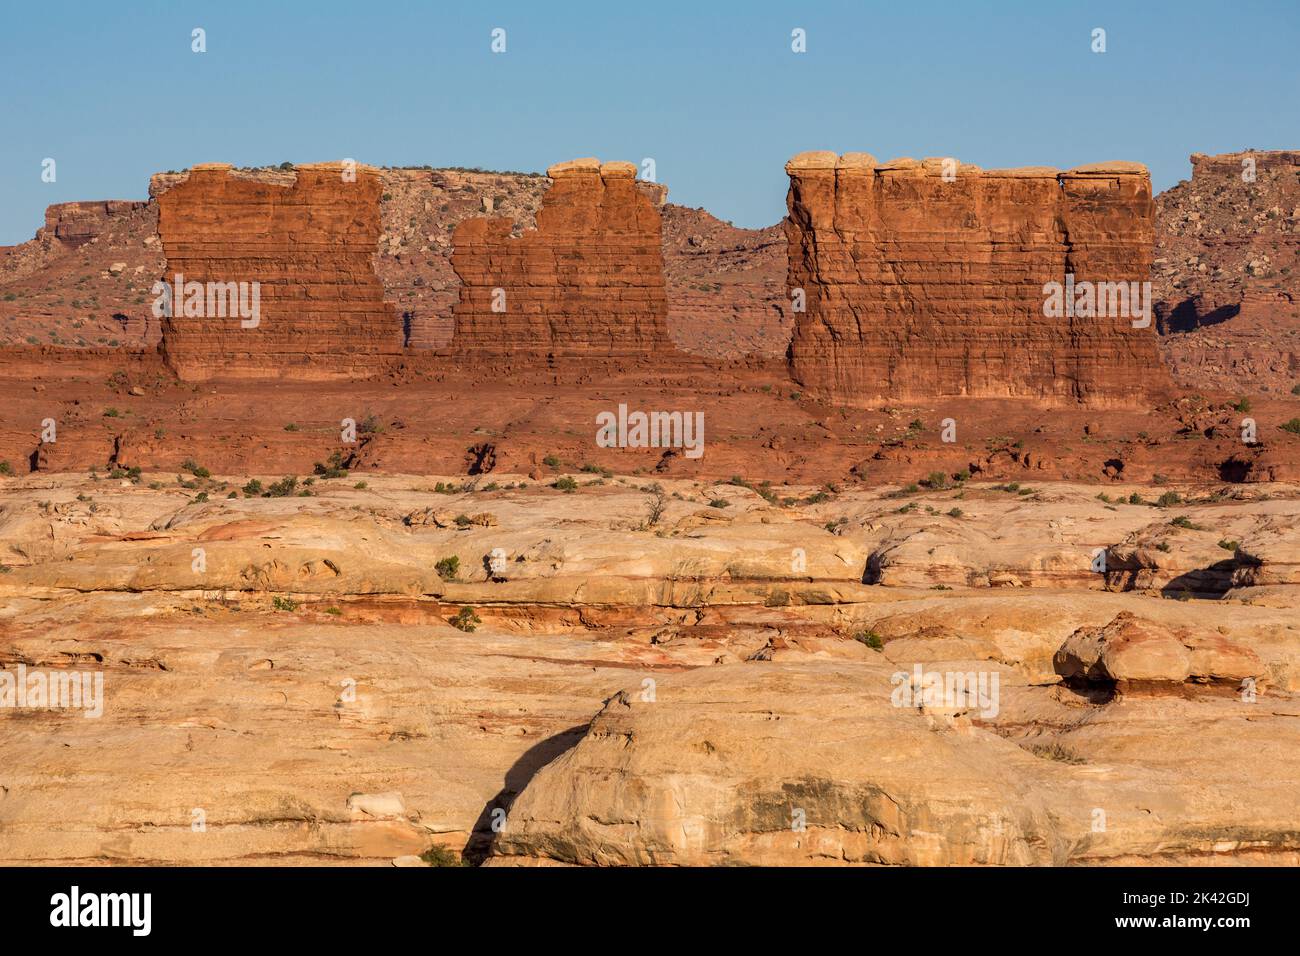 The Chocolate Drops in the Land of Standing Rocks in the Maze District of Canyonlands National Park, Utah. Stock Photo